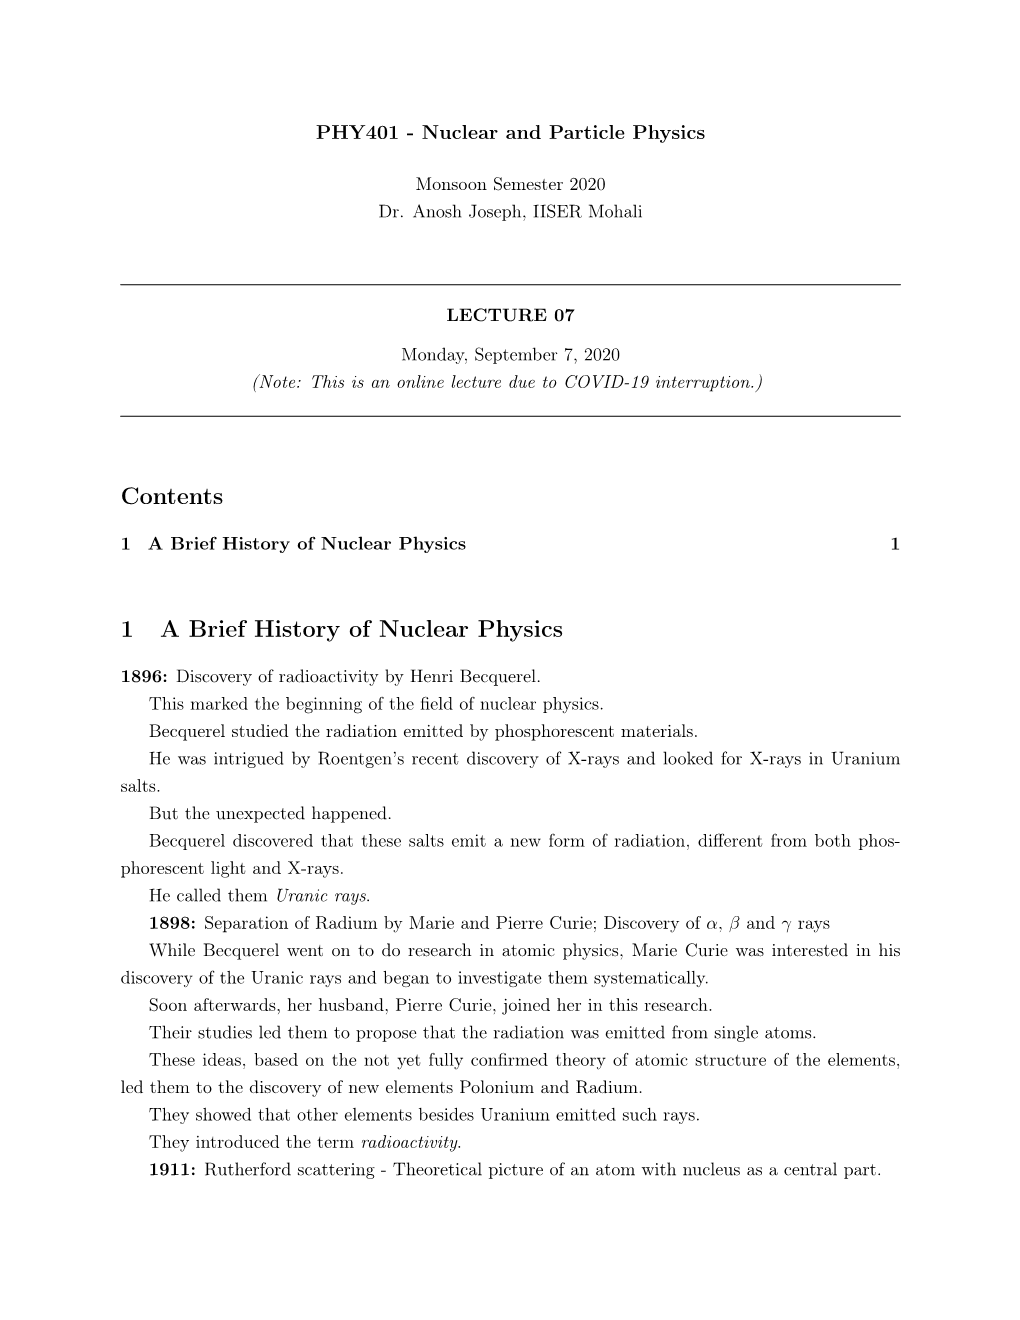 Contents 1 a Brief History of Nuclear Physics